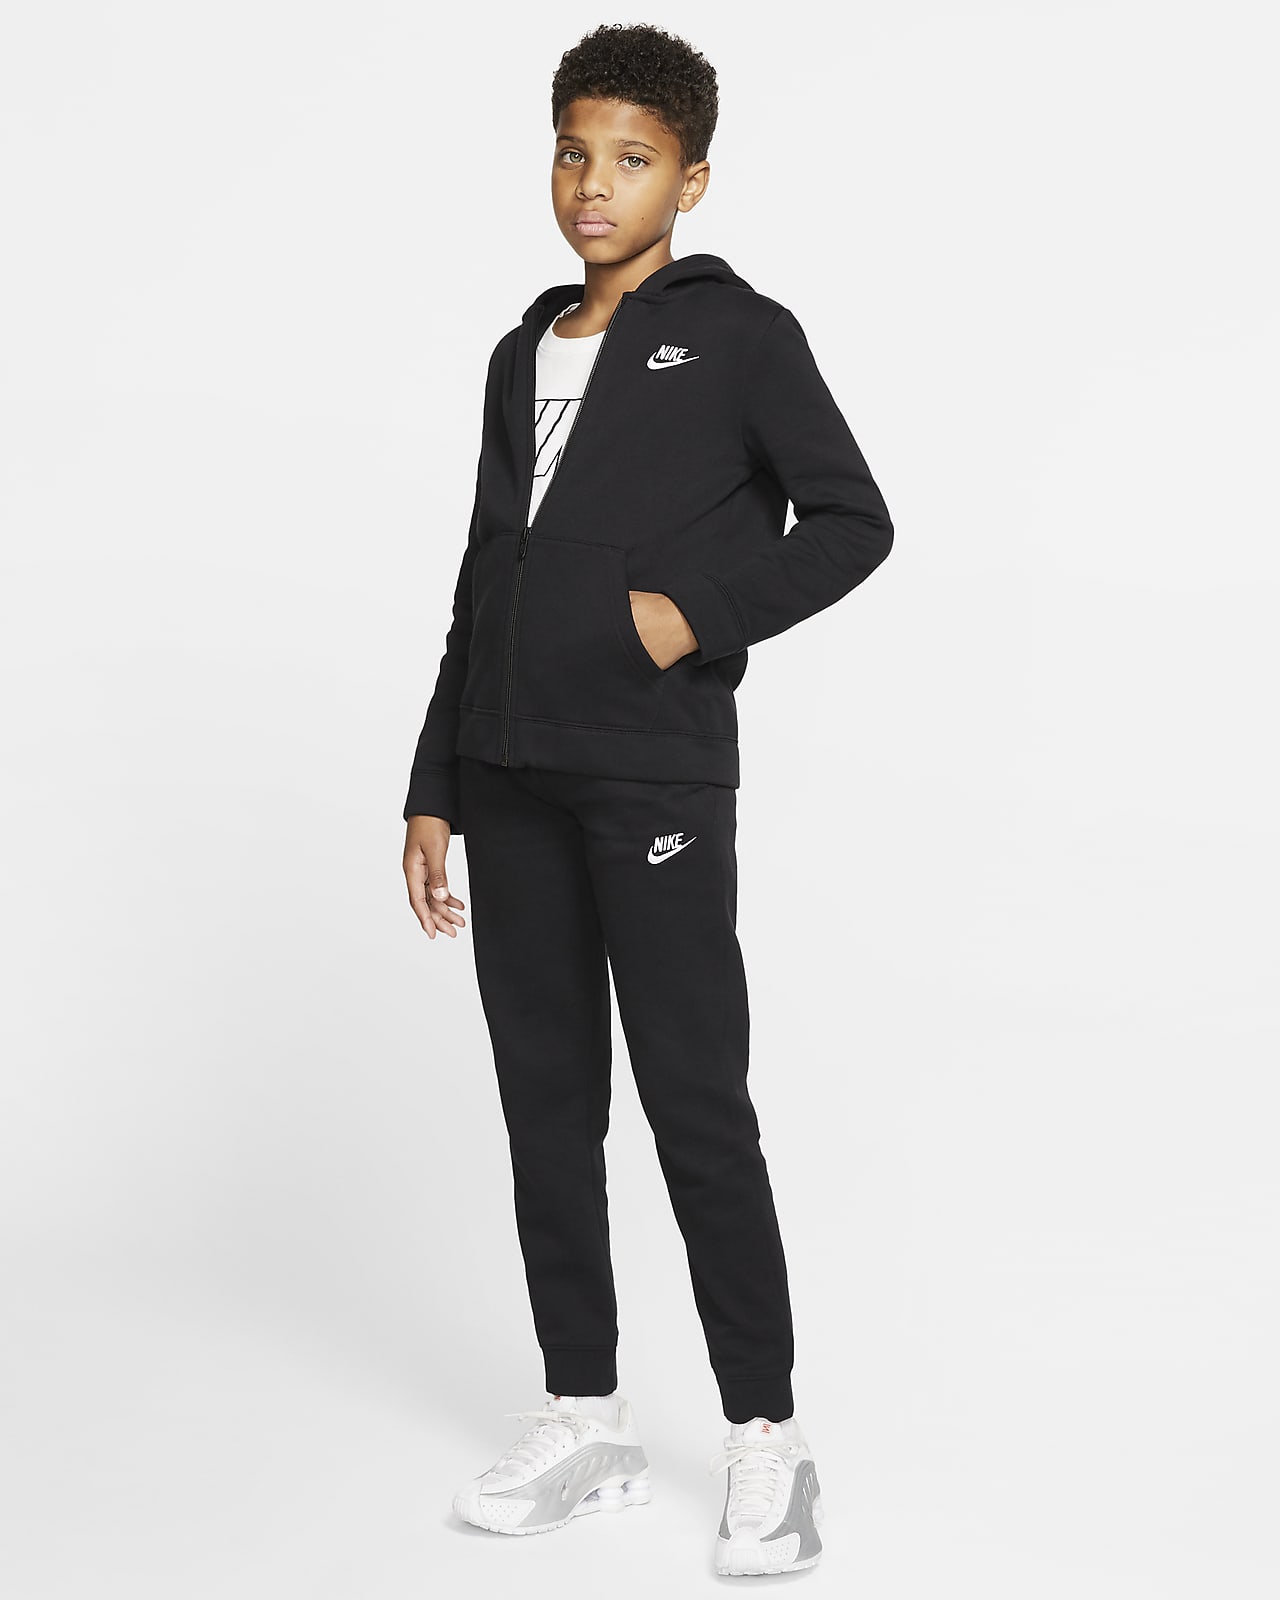 Find Out Where To Get The Jumpsuit  Nike sweats outfit, Sweats outfit, Sweat  suits outfits